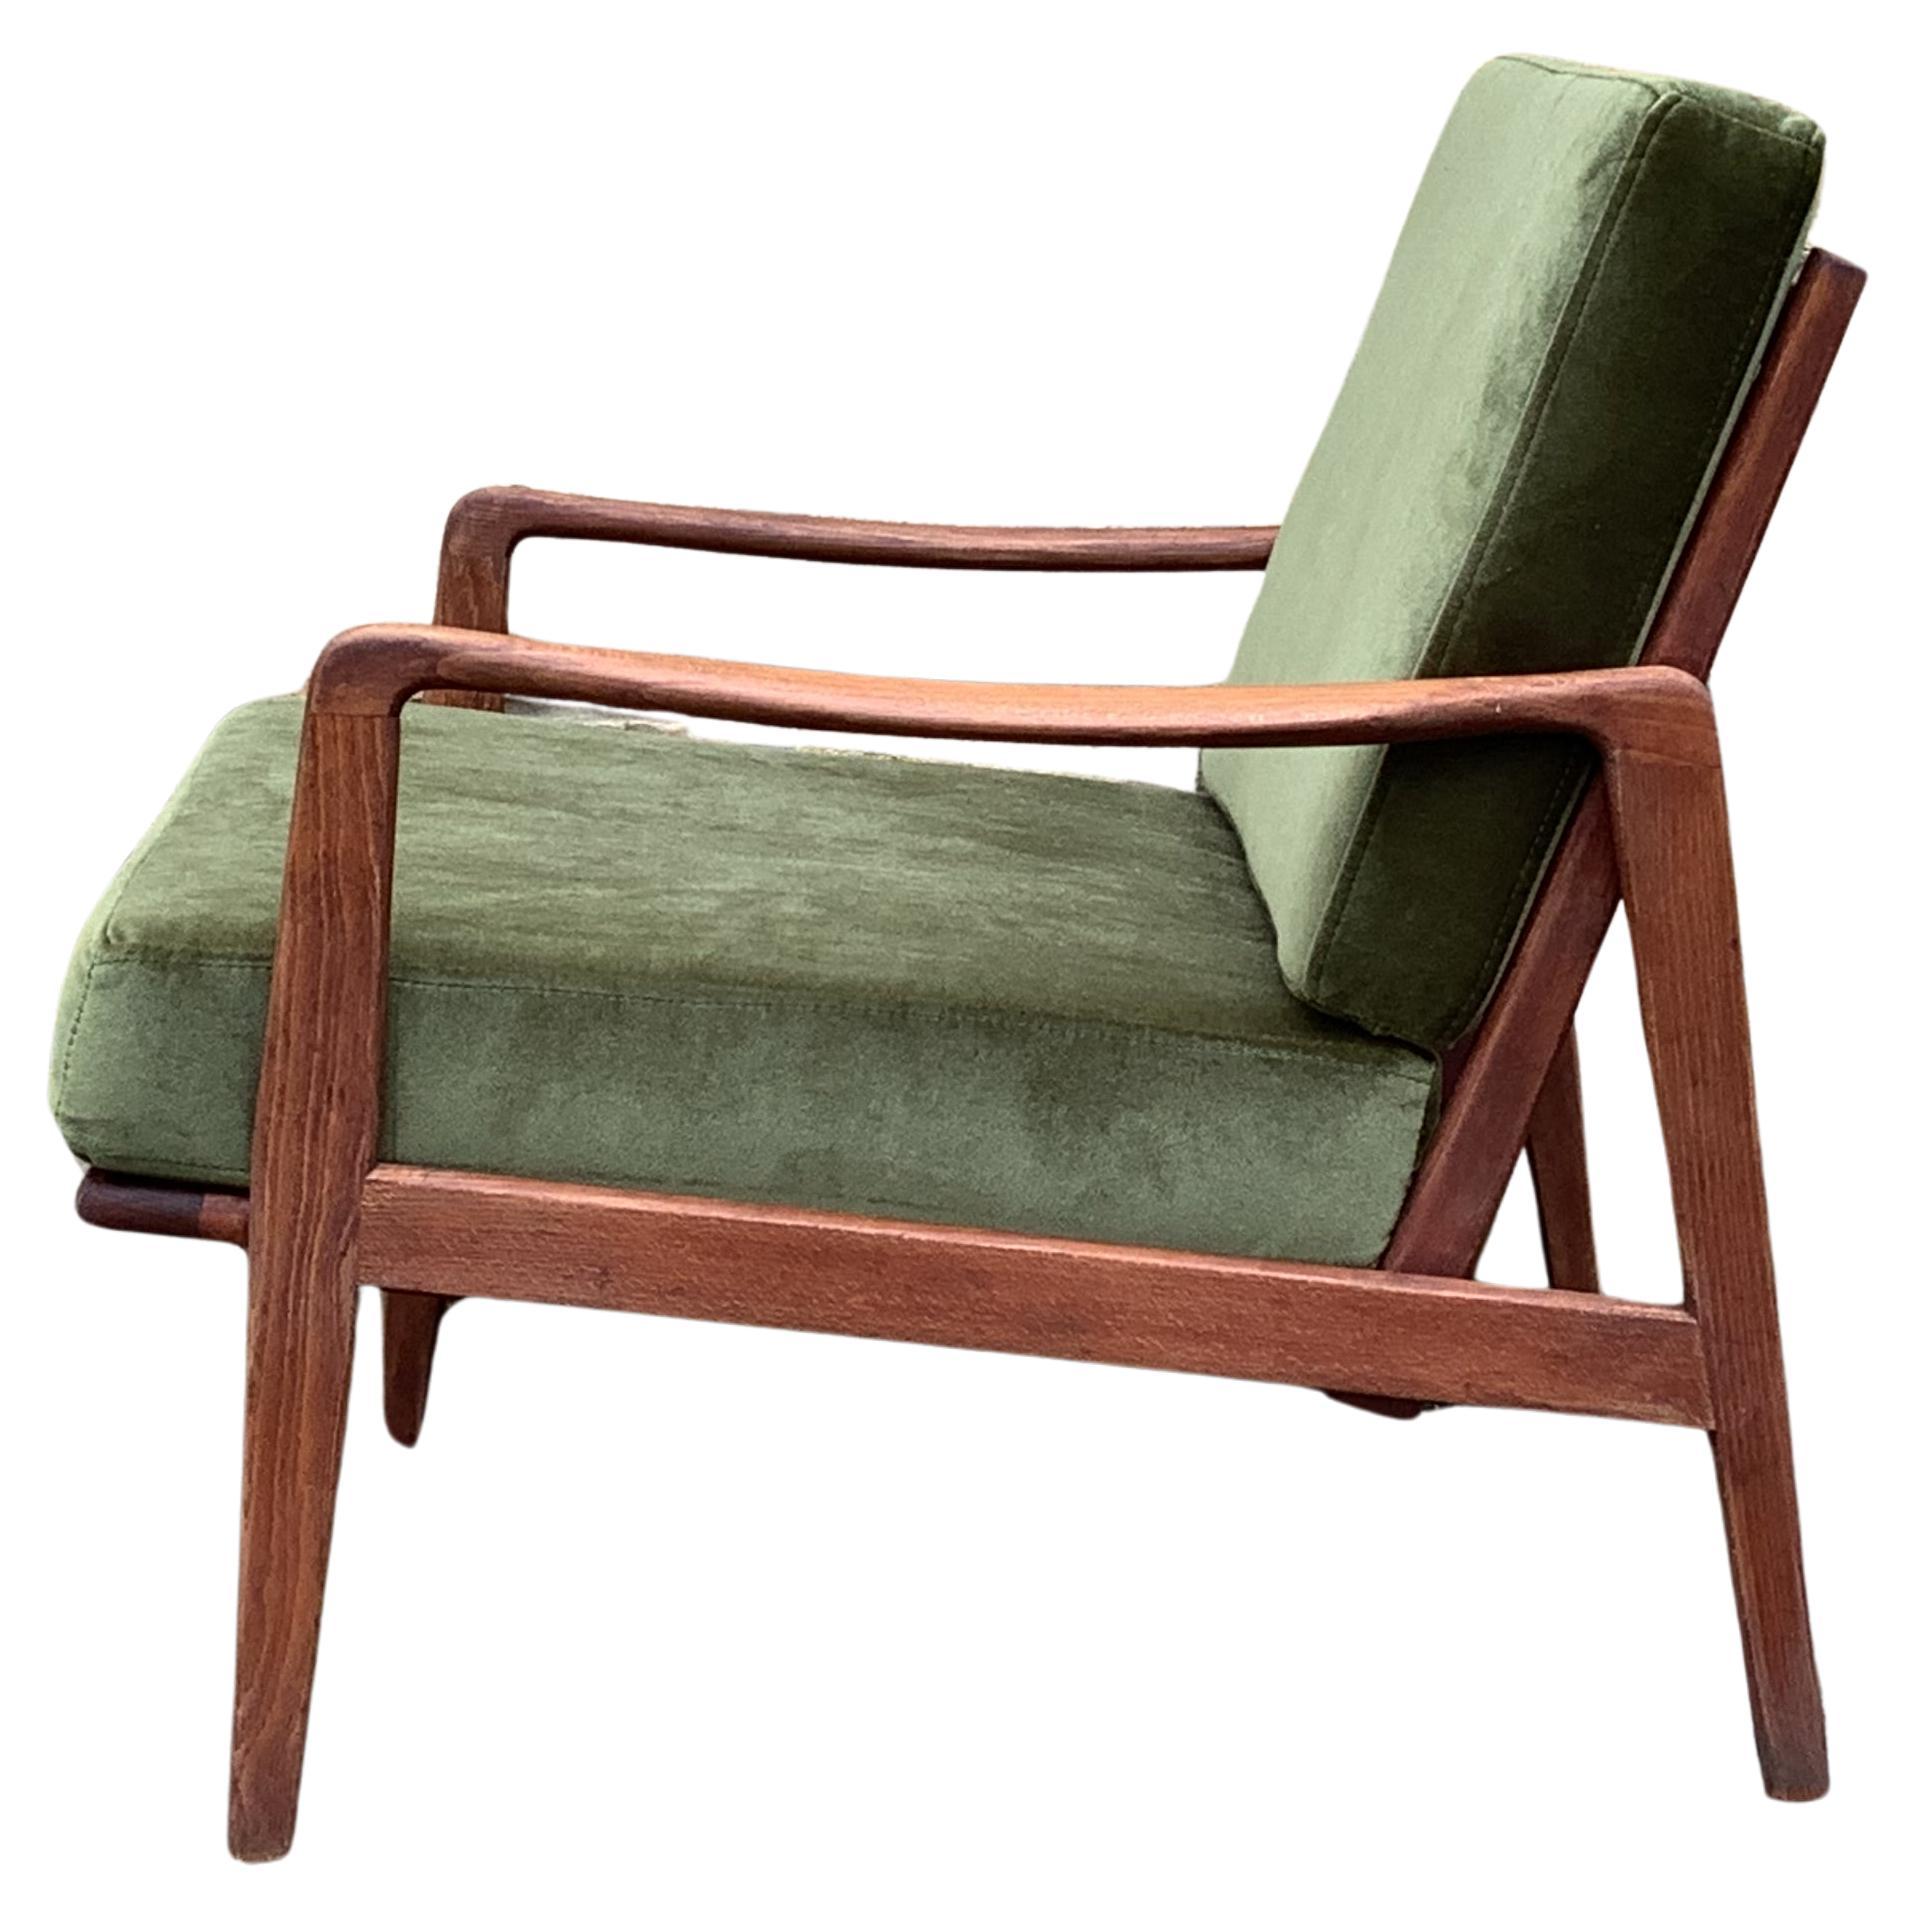 1960's Dnaish armchair in the style of Ole Wabscher 